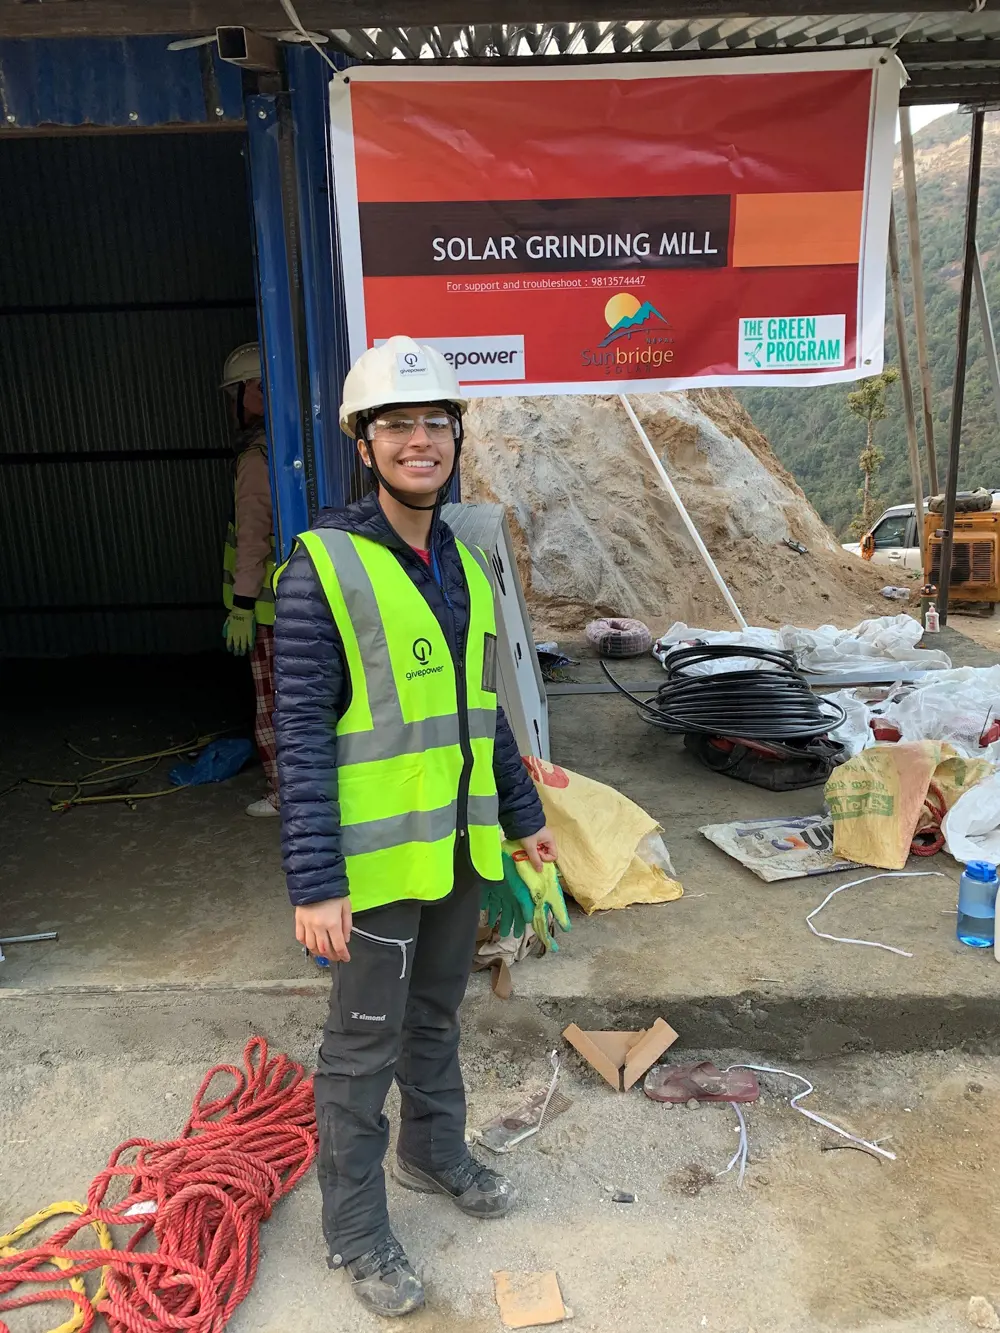 A female engineer onsite at a solar powered grinding mill.